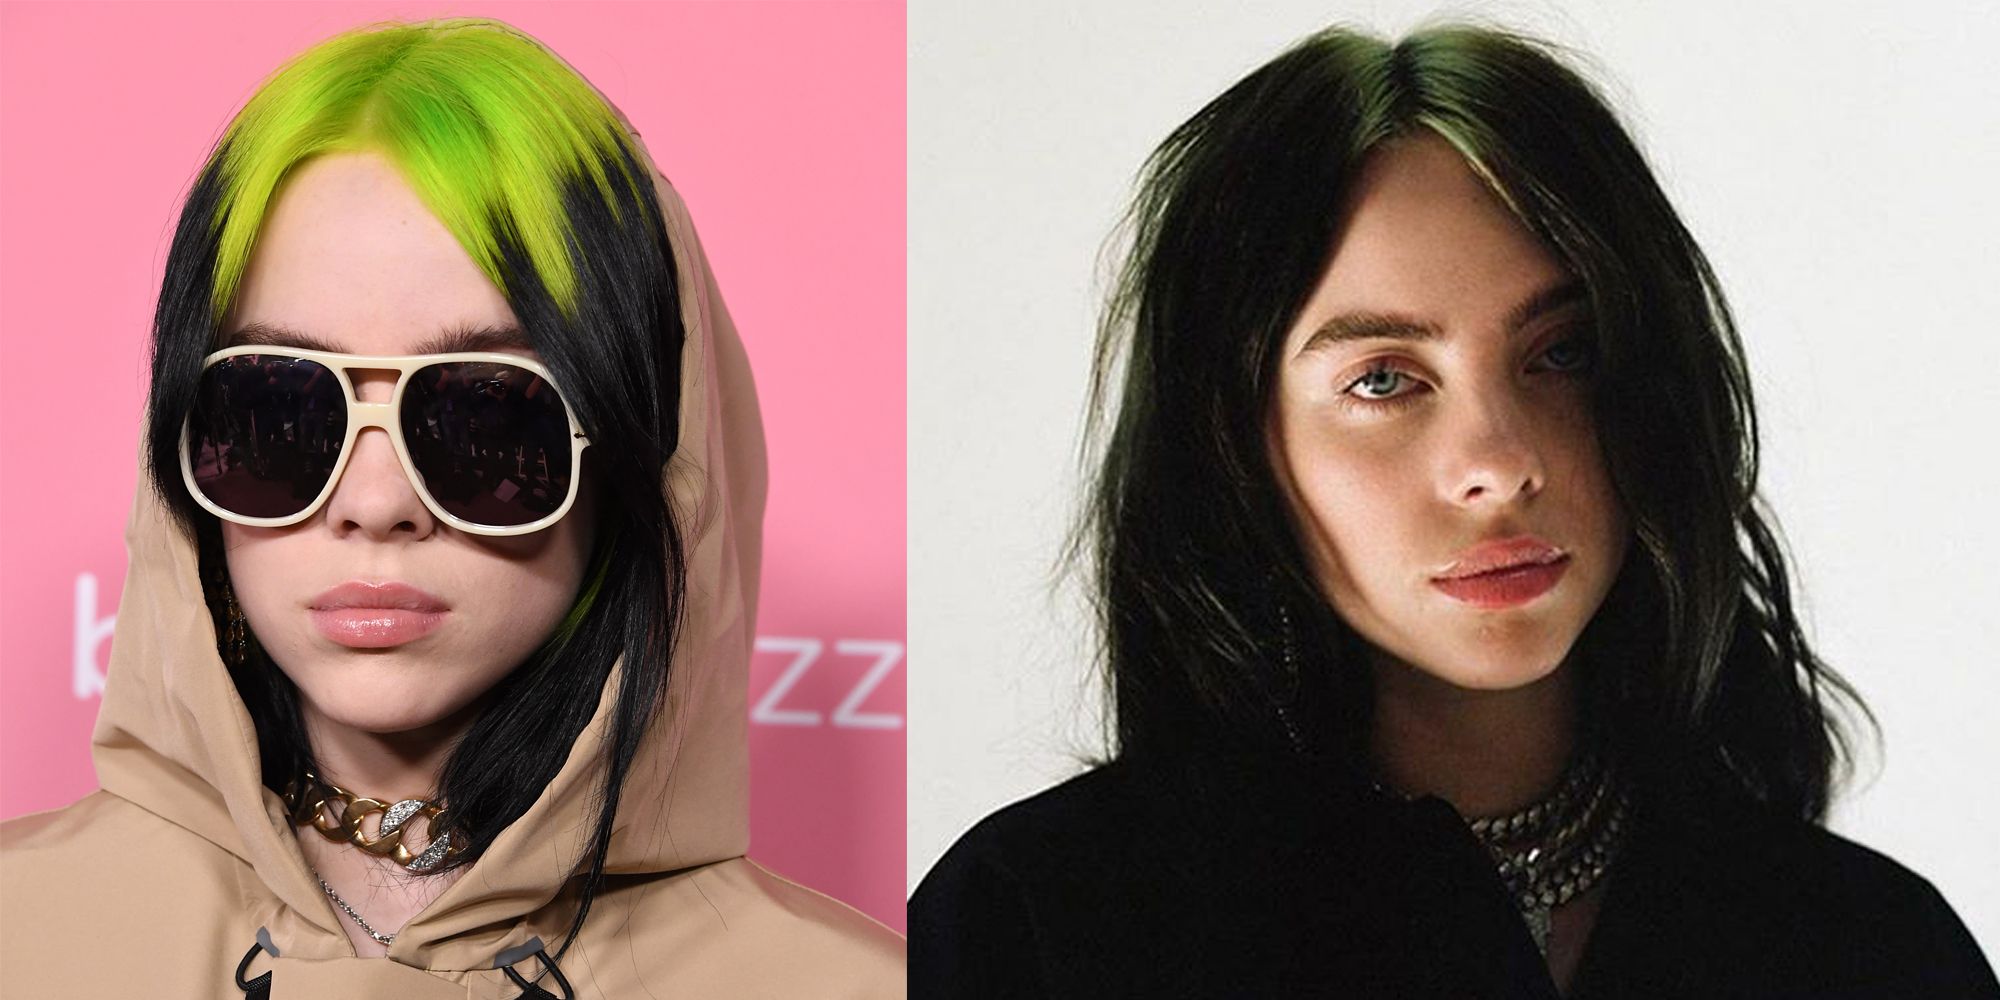 Billie Eilish might be getting rid of her green hair